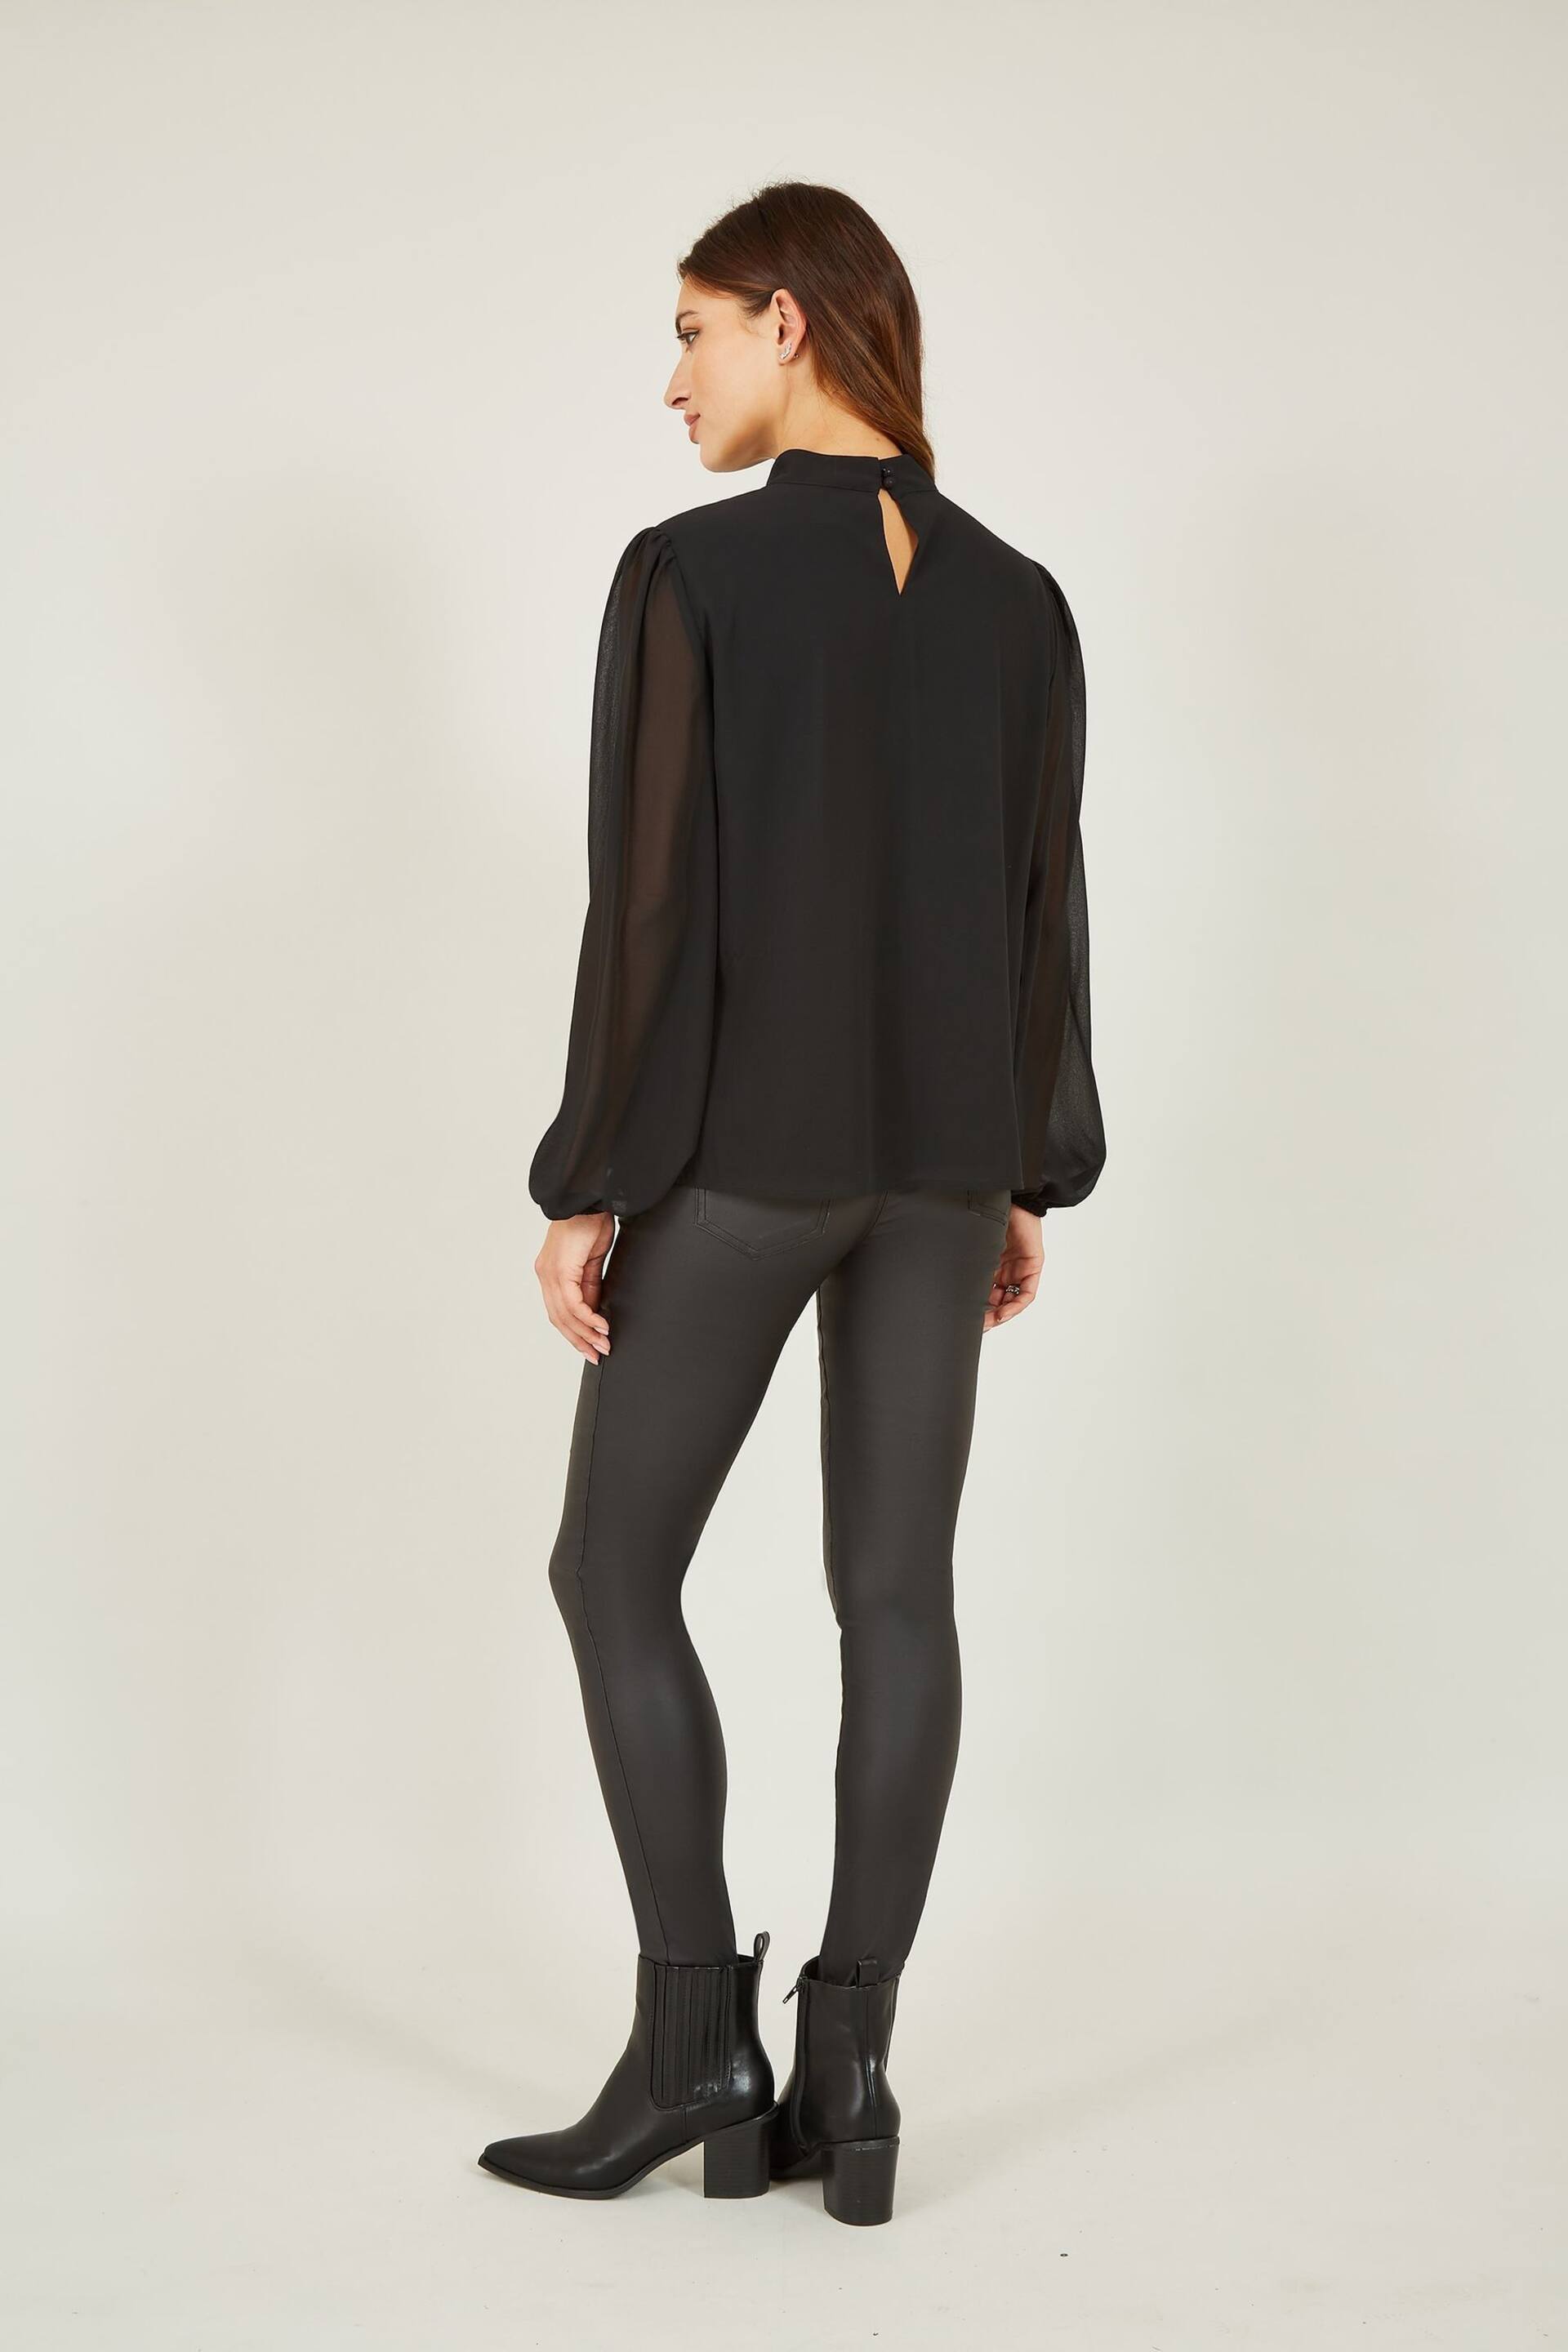 Mela Black Pleated Long Sleeve Top With High Neck - Image 3 of 4